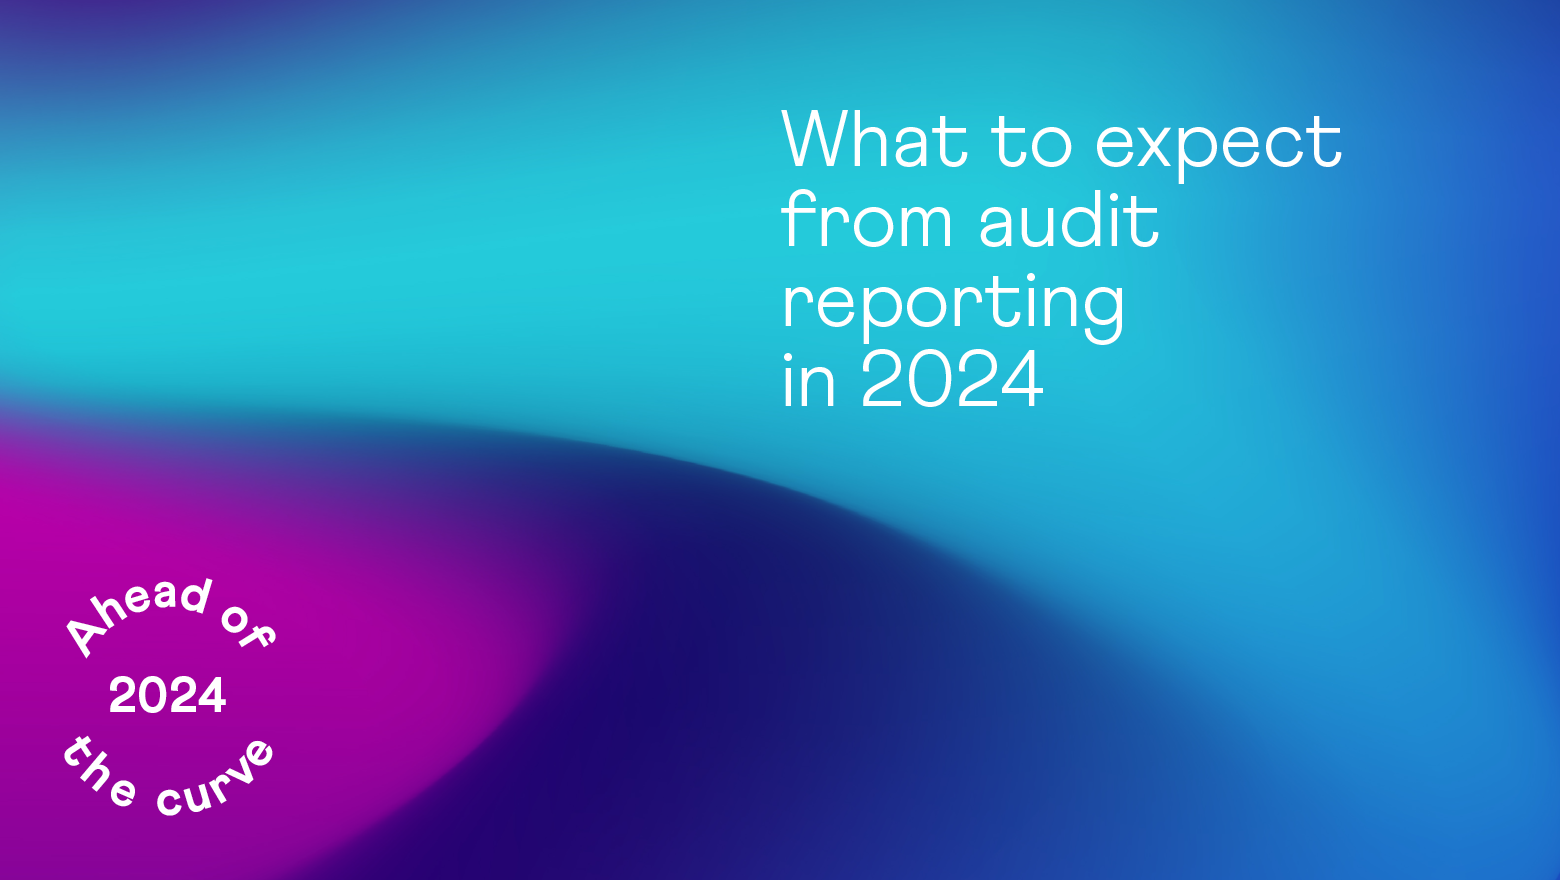 What to expect from audit reporting in 2024